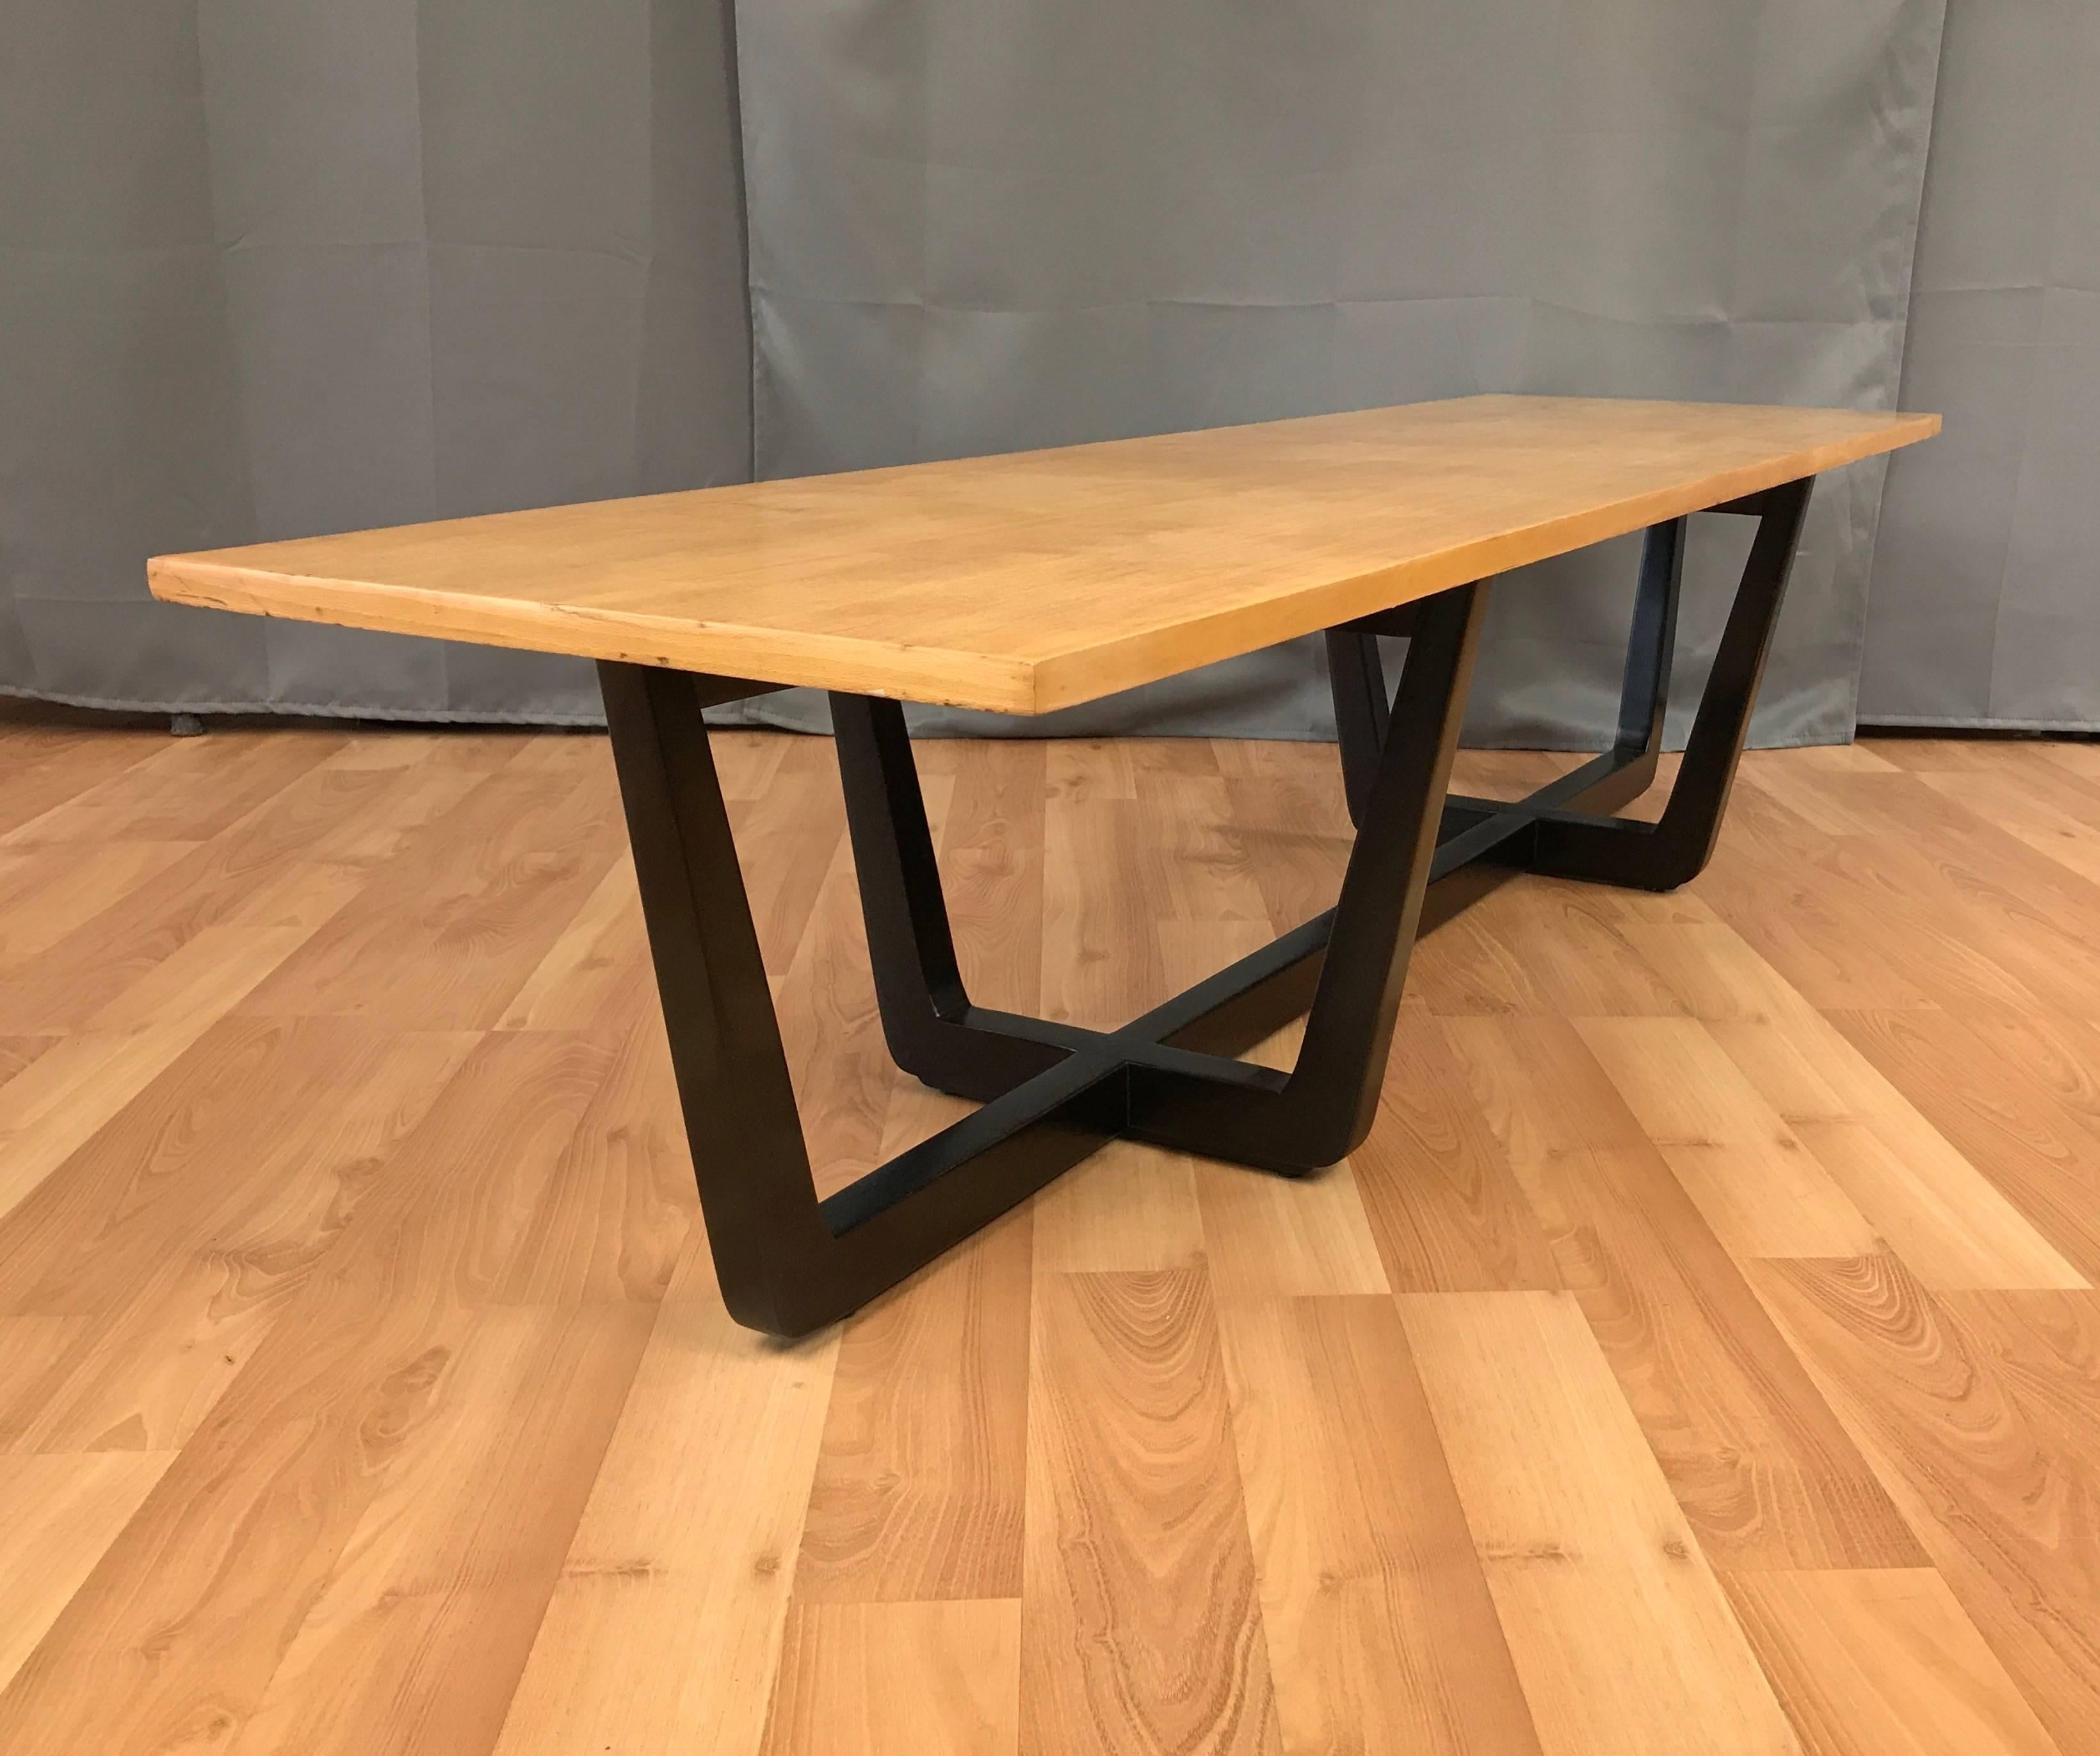 A Model No. 203 elm bench or coffee table designed by Edward Wormley for Drexel’s Precedent Collection.

Long rectangular top in linear-grain elm veneer. Satin black lacquered base comprised of three intersecting tapered U-shaped elements. Very